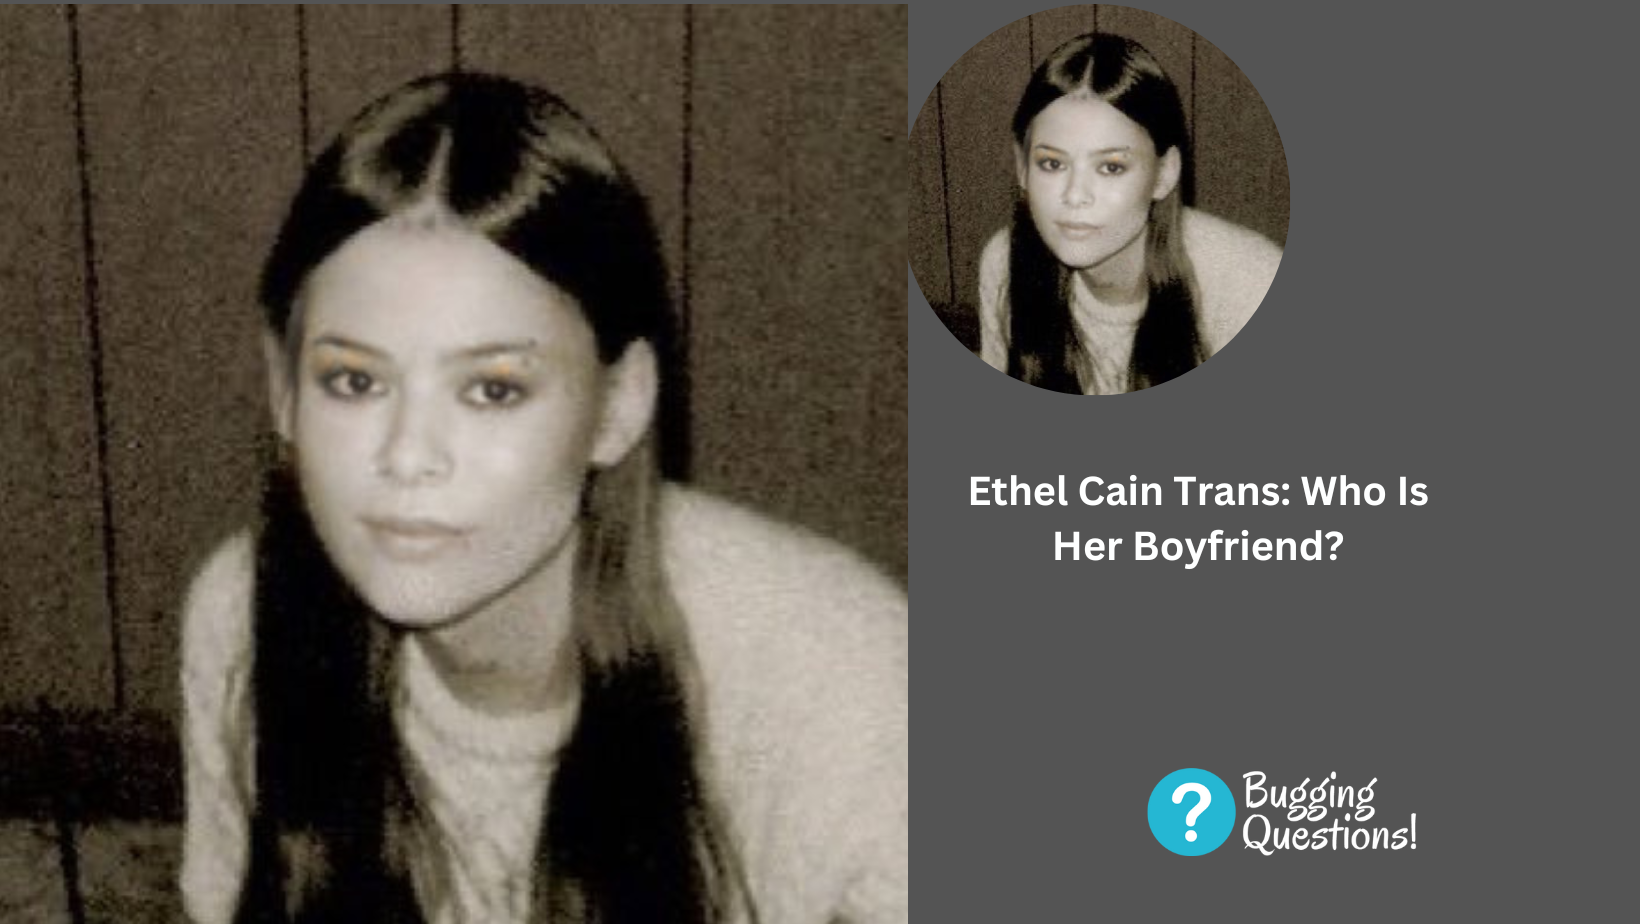 Ethel Cain Trans: Who Is Her Boyfriend?